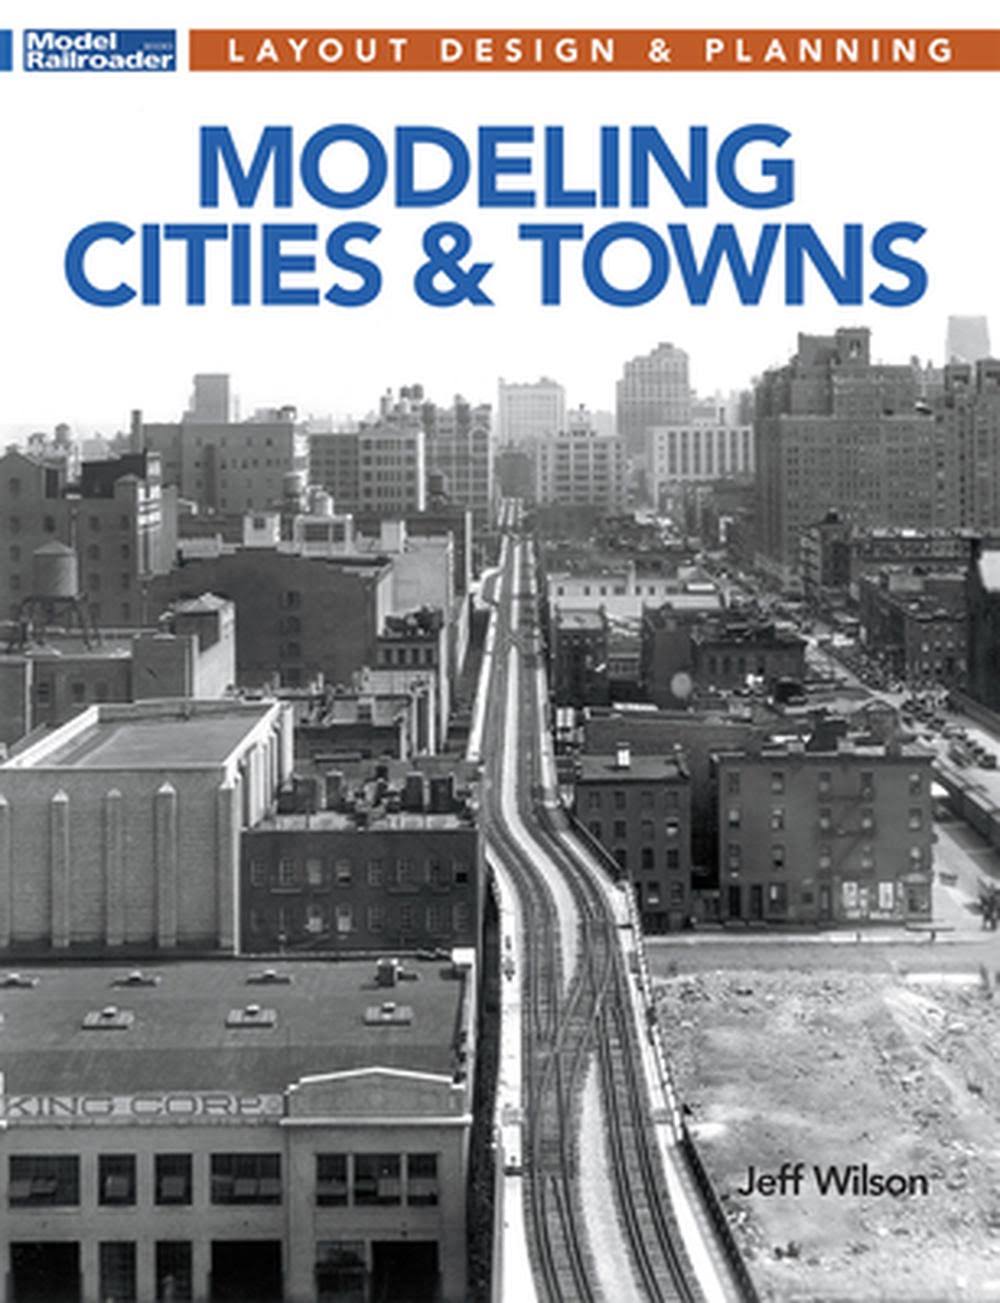 Modeling Cities and Towns by Jeff Wilson